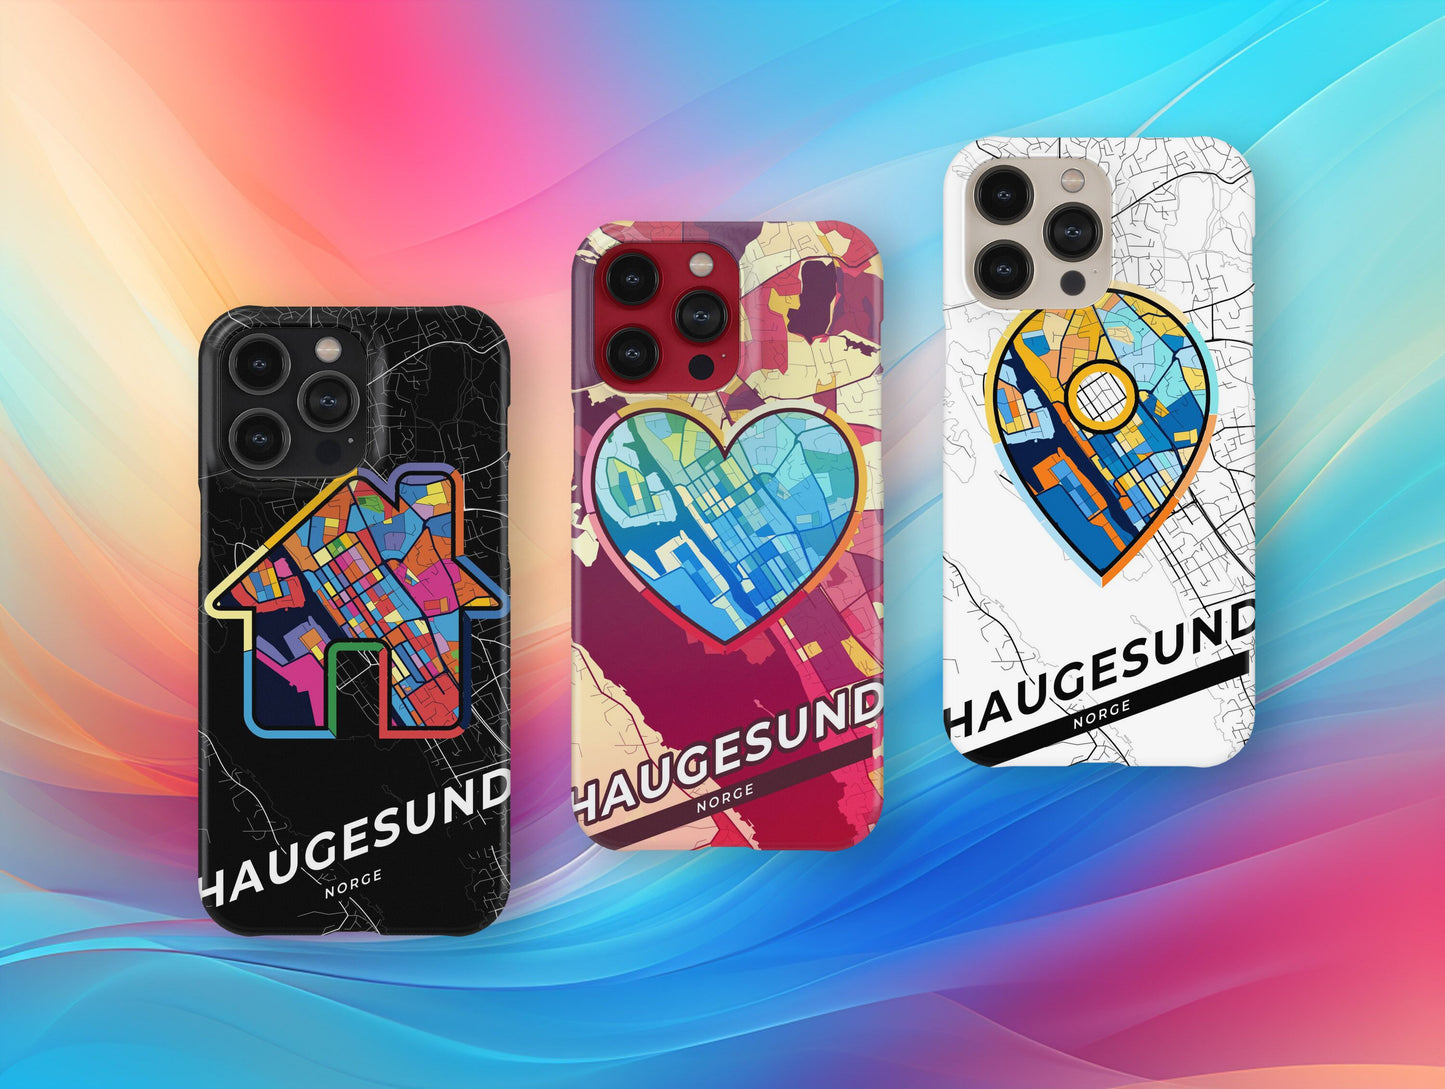 Haugesund Norway slim phone case with colorful icon. Birthday, wedding or housewarming gift. Couple match cases.